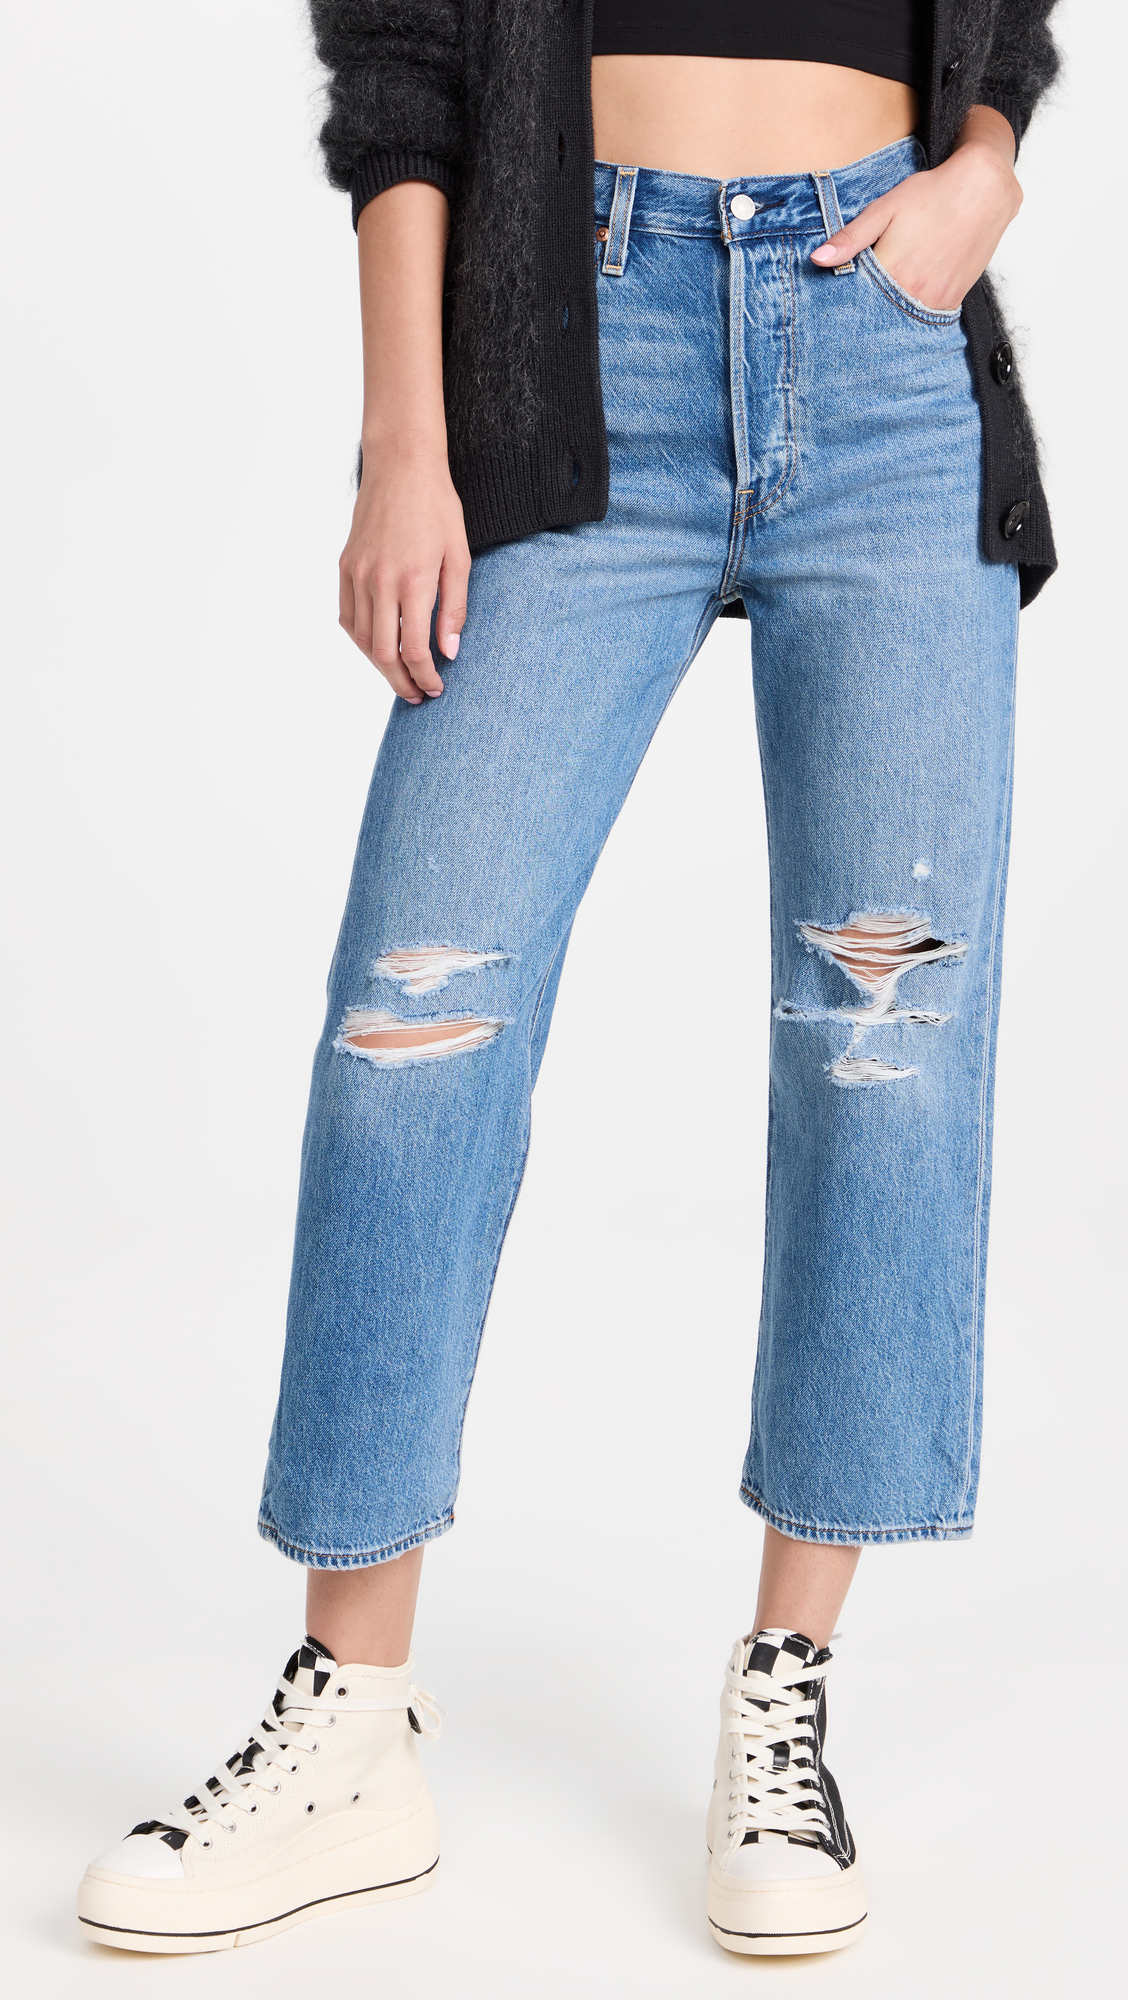 Shopbop Put a Ton of Sweaters and Designer Jeans on Sale | Who What Wear